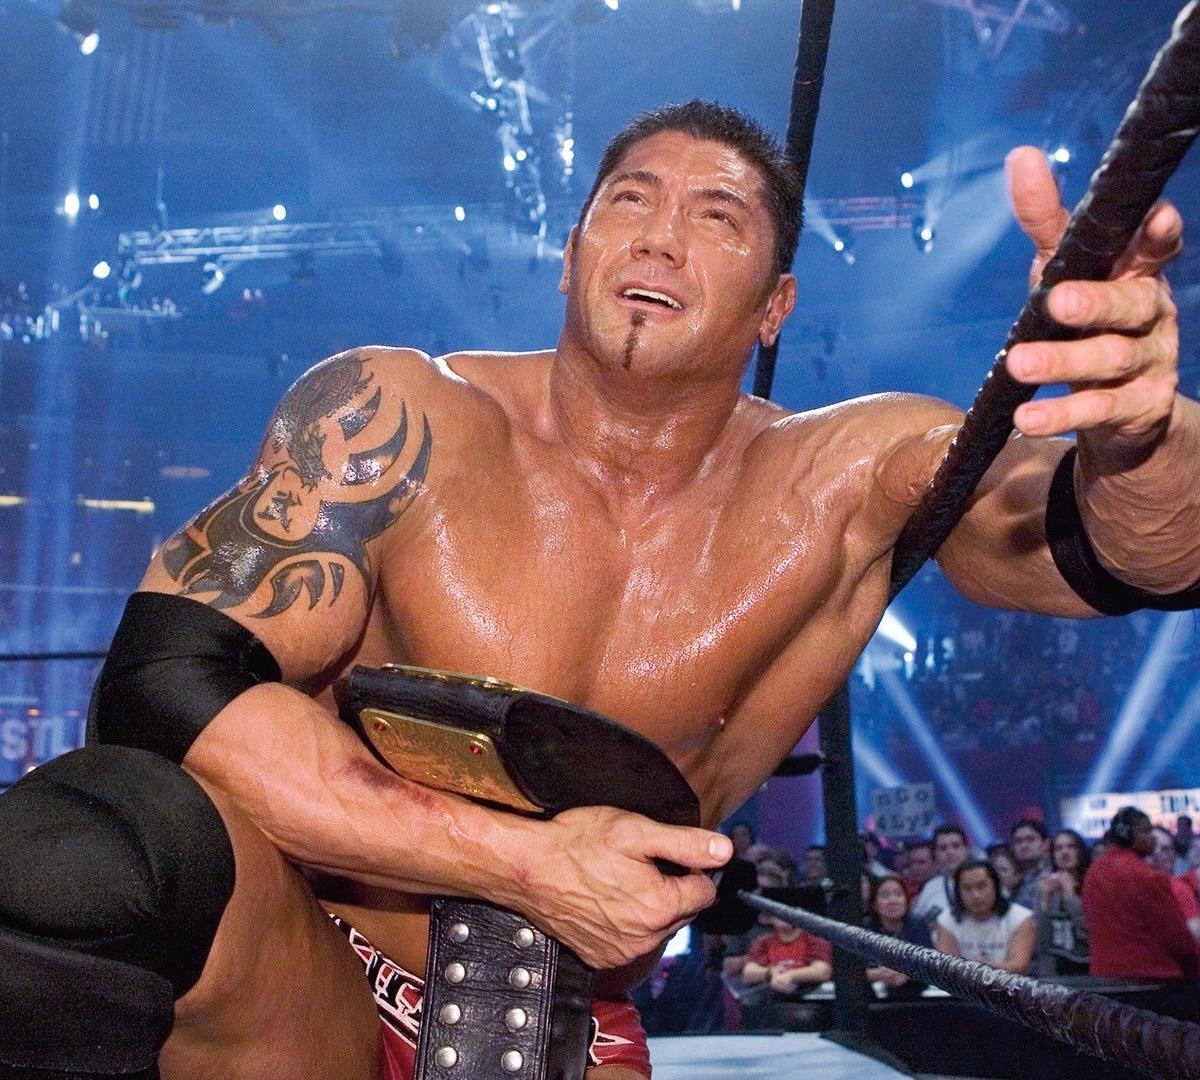 Batista’s 8 Best Matches, Moments That Made Him a WWE Icon